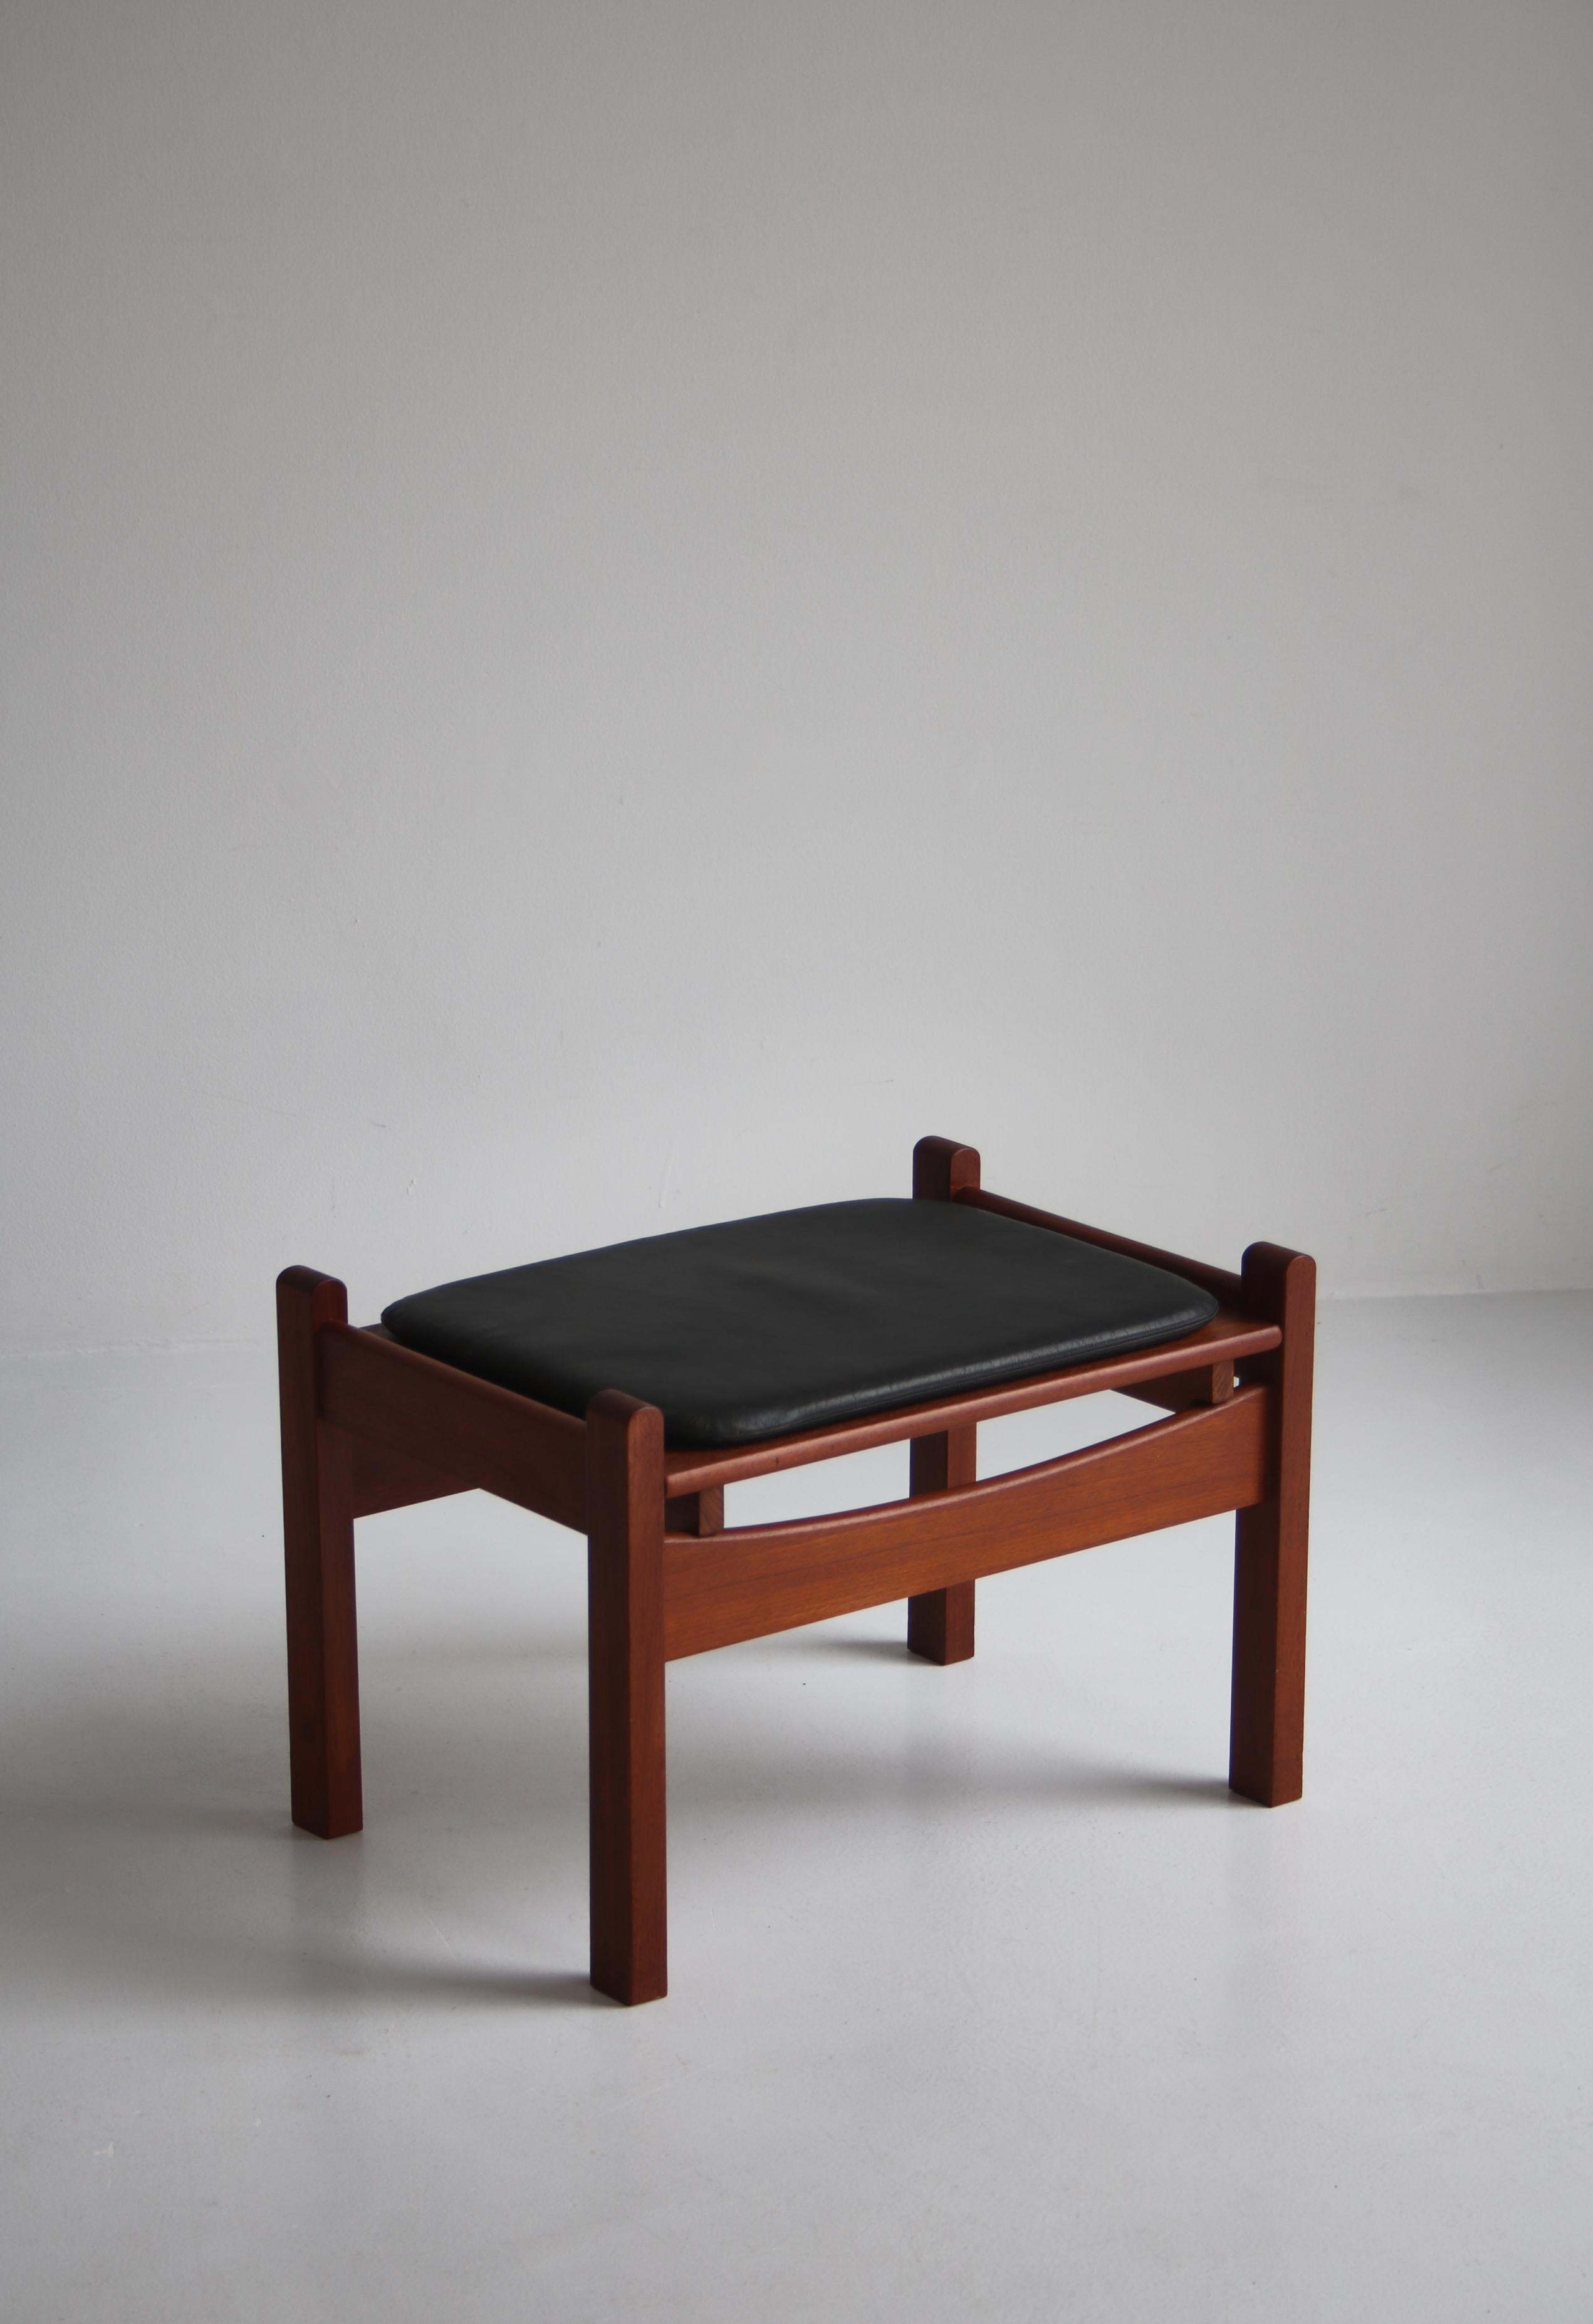 Danish Modern Stool / Sidetable in Teakwood and Black Leather, 1960s In Good Condition For Sale In Odense, DK